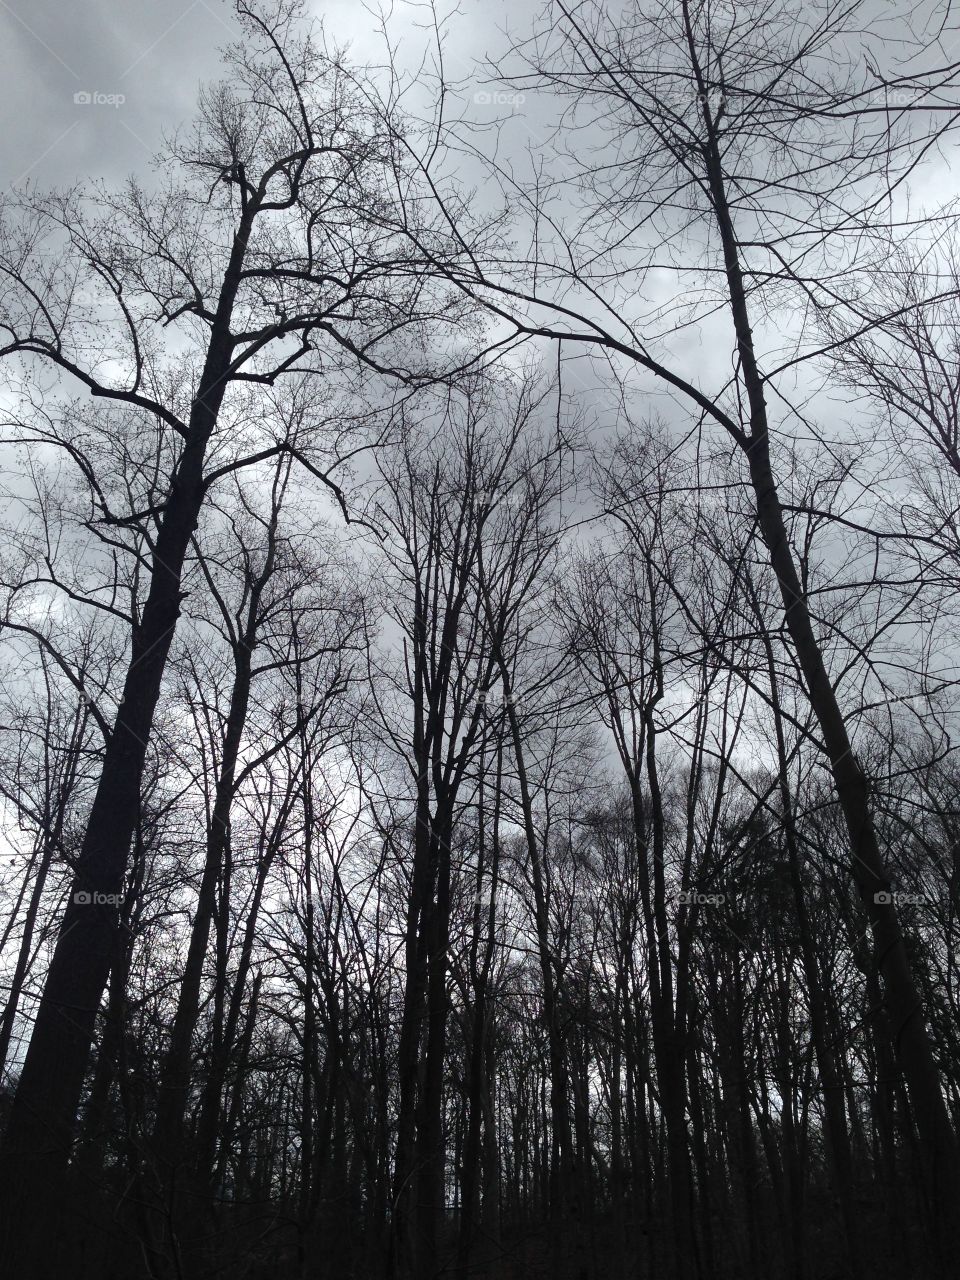 Low angle view of silhouetted bare trees